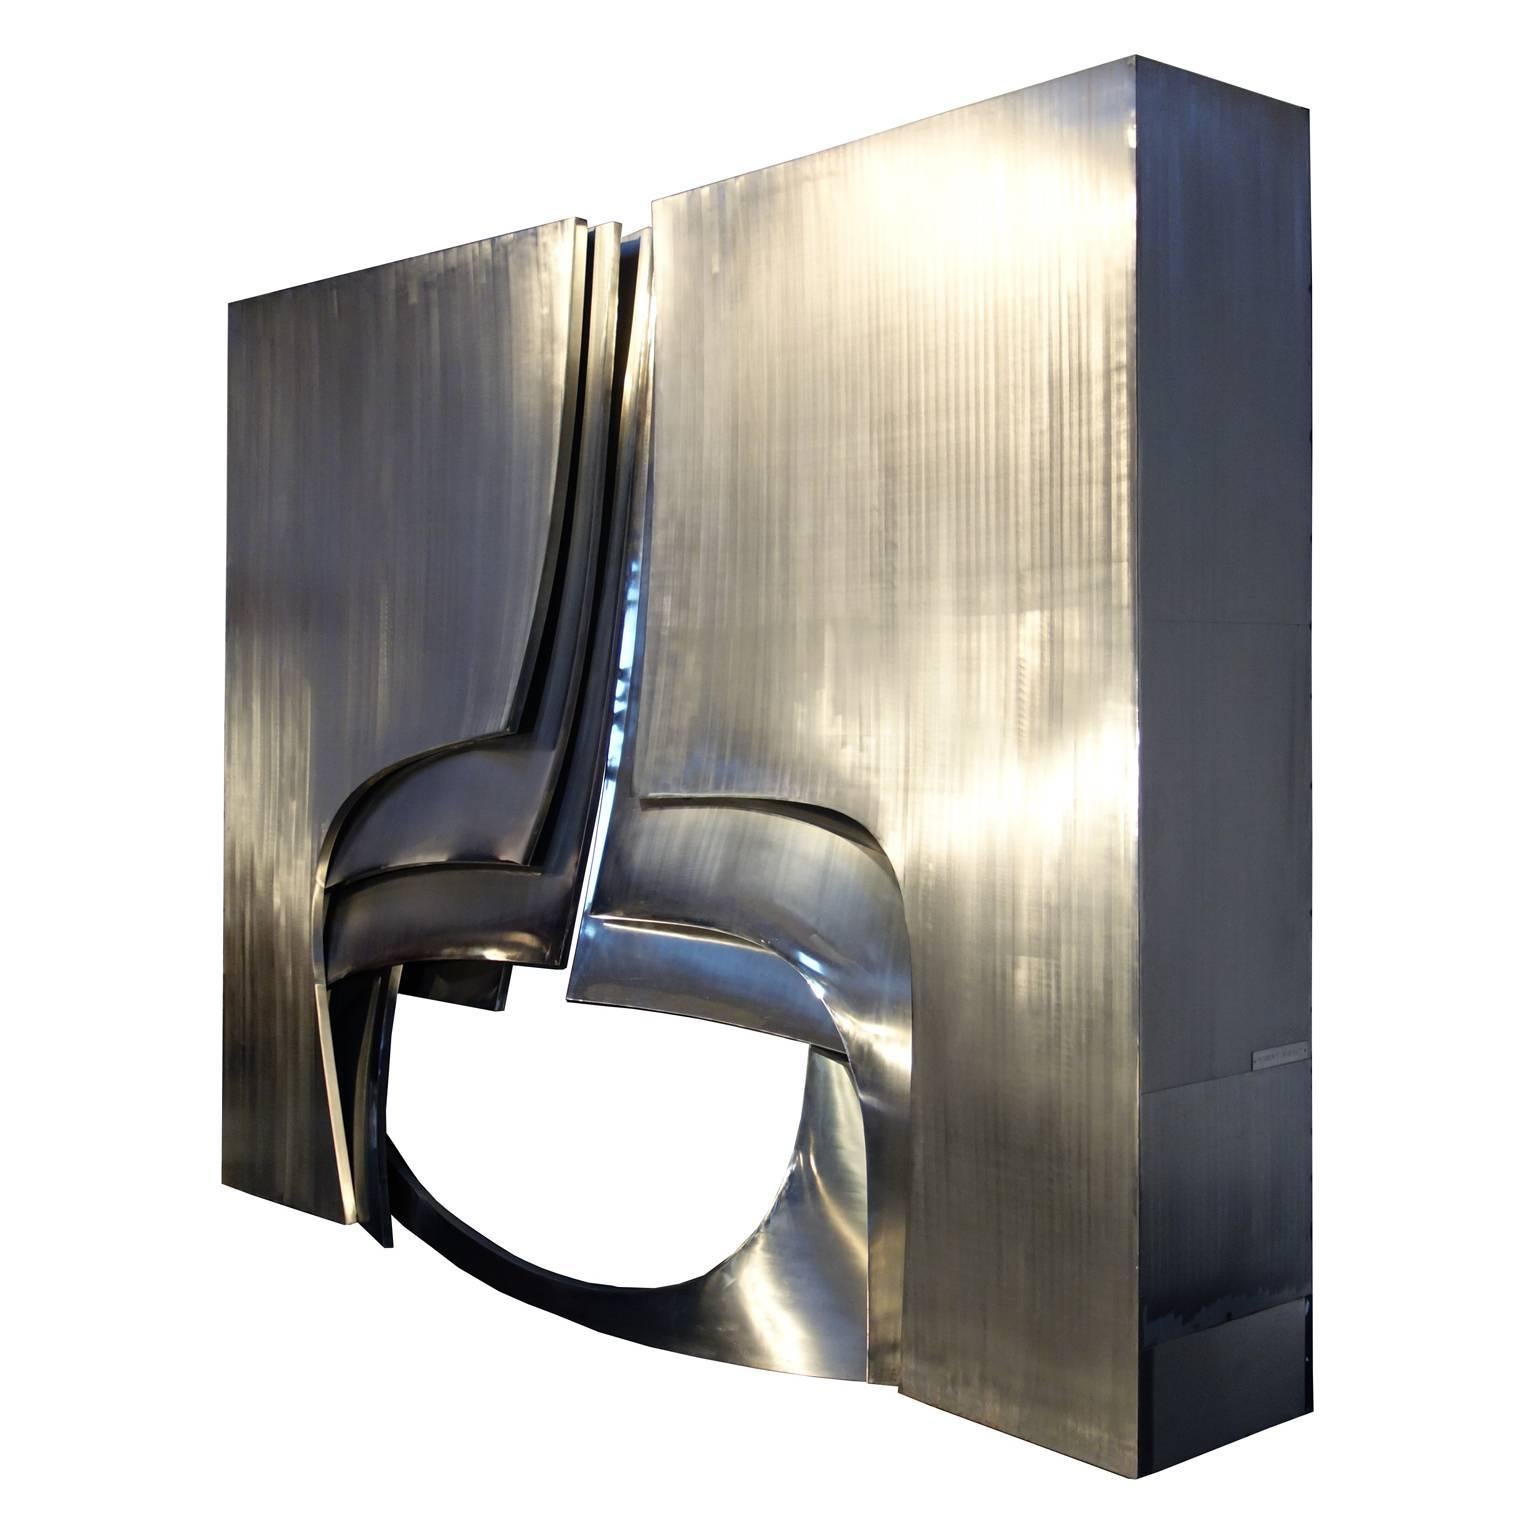 Magnificent steel mantelpiece created by Robert Rigaut, a french sculptor.
Commissioned by on of the most prominent Italian art collector a for his private home in Megève.

Brushed steel surfaces and polished highlights are combined to form a